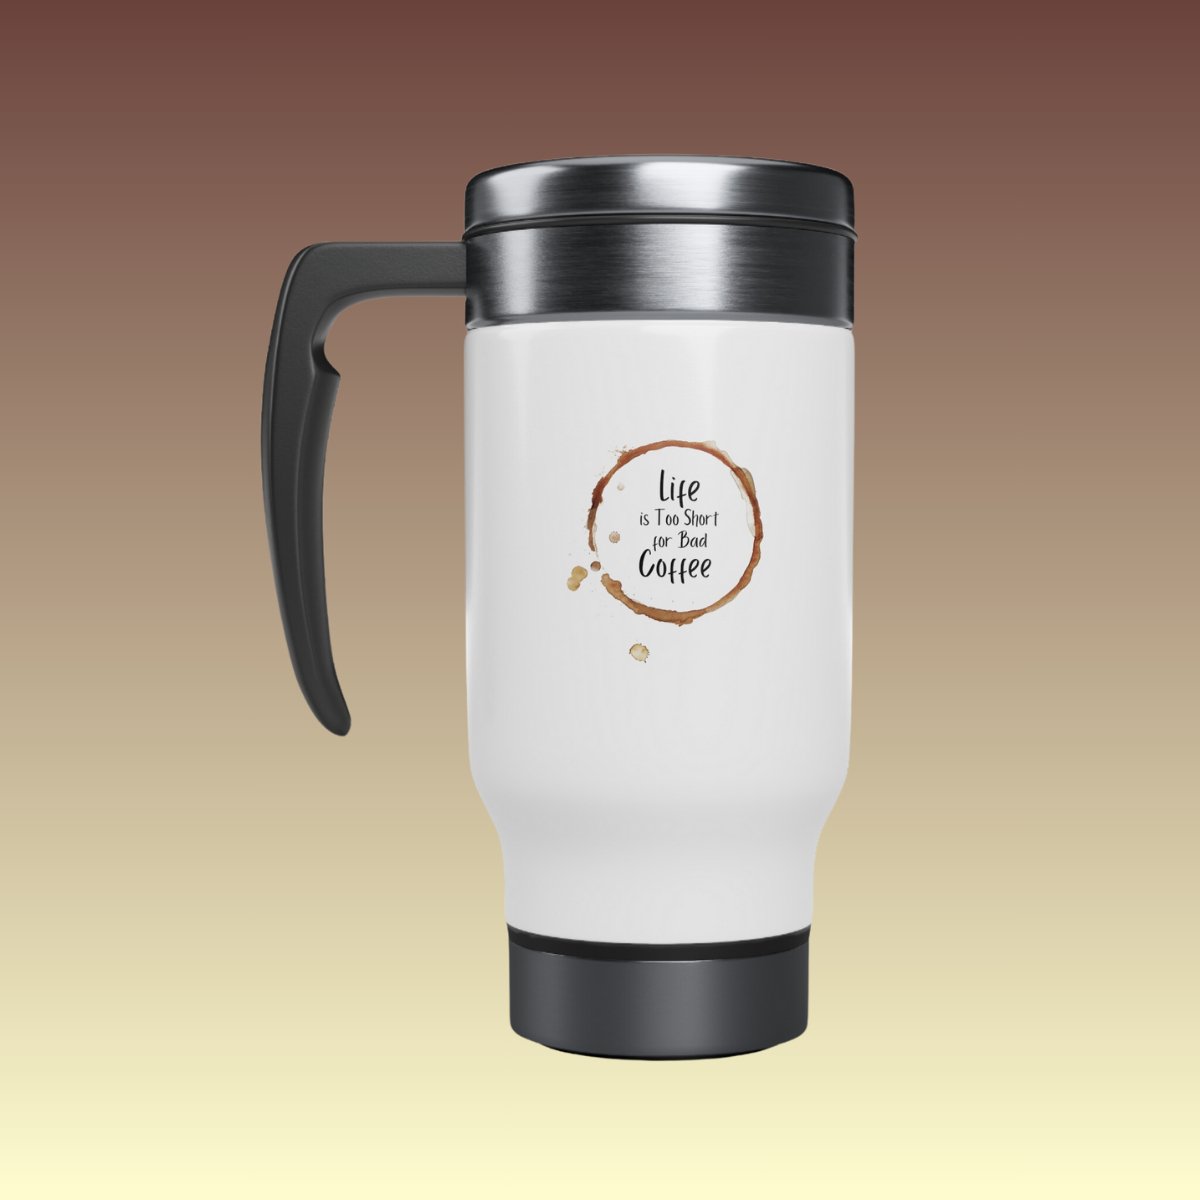 Life Is Too Short For Bad Coffee Stainless Steel Travel Mug - Coffee Purrfection